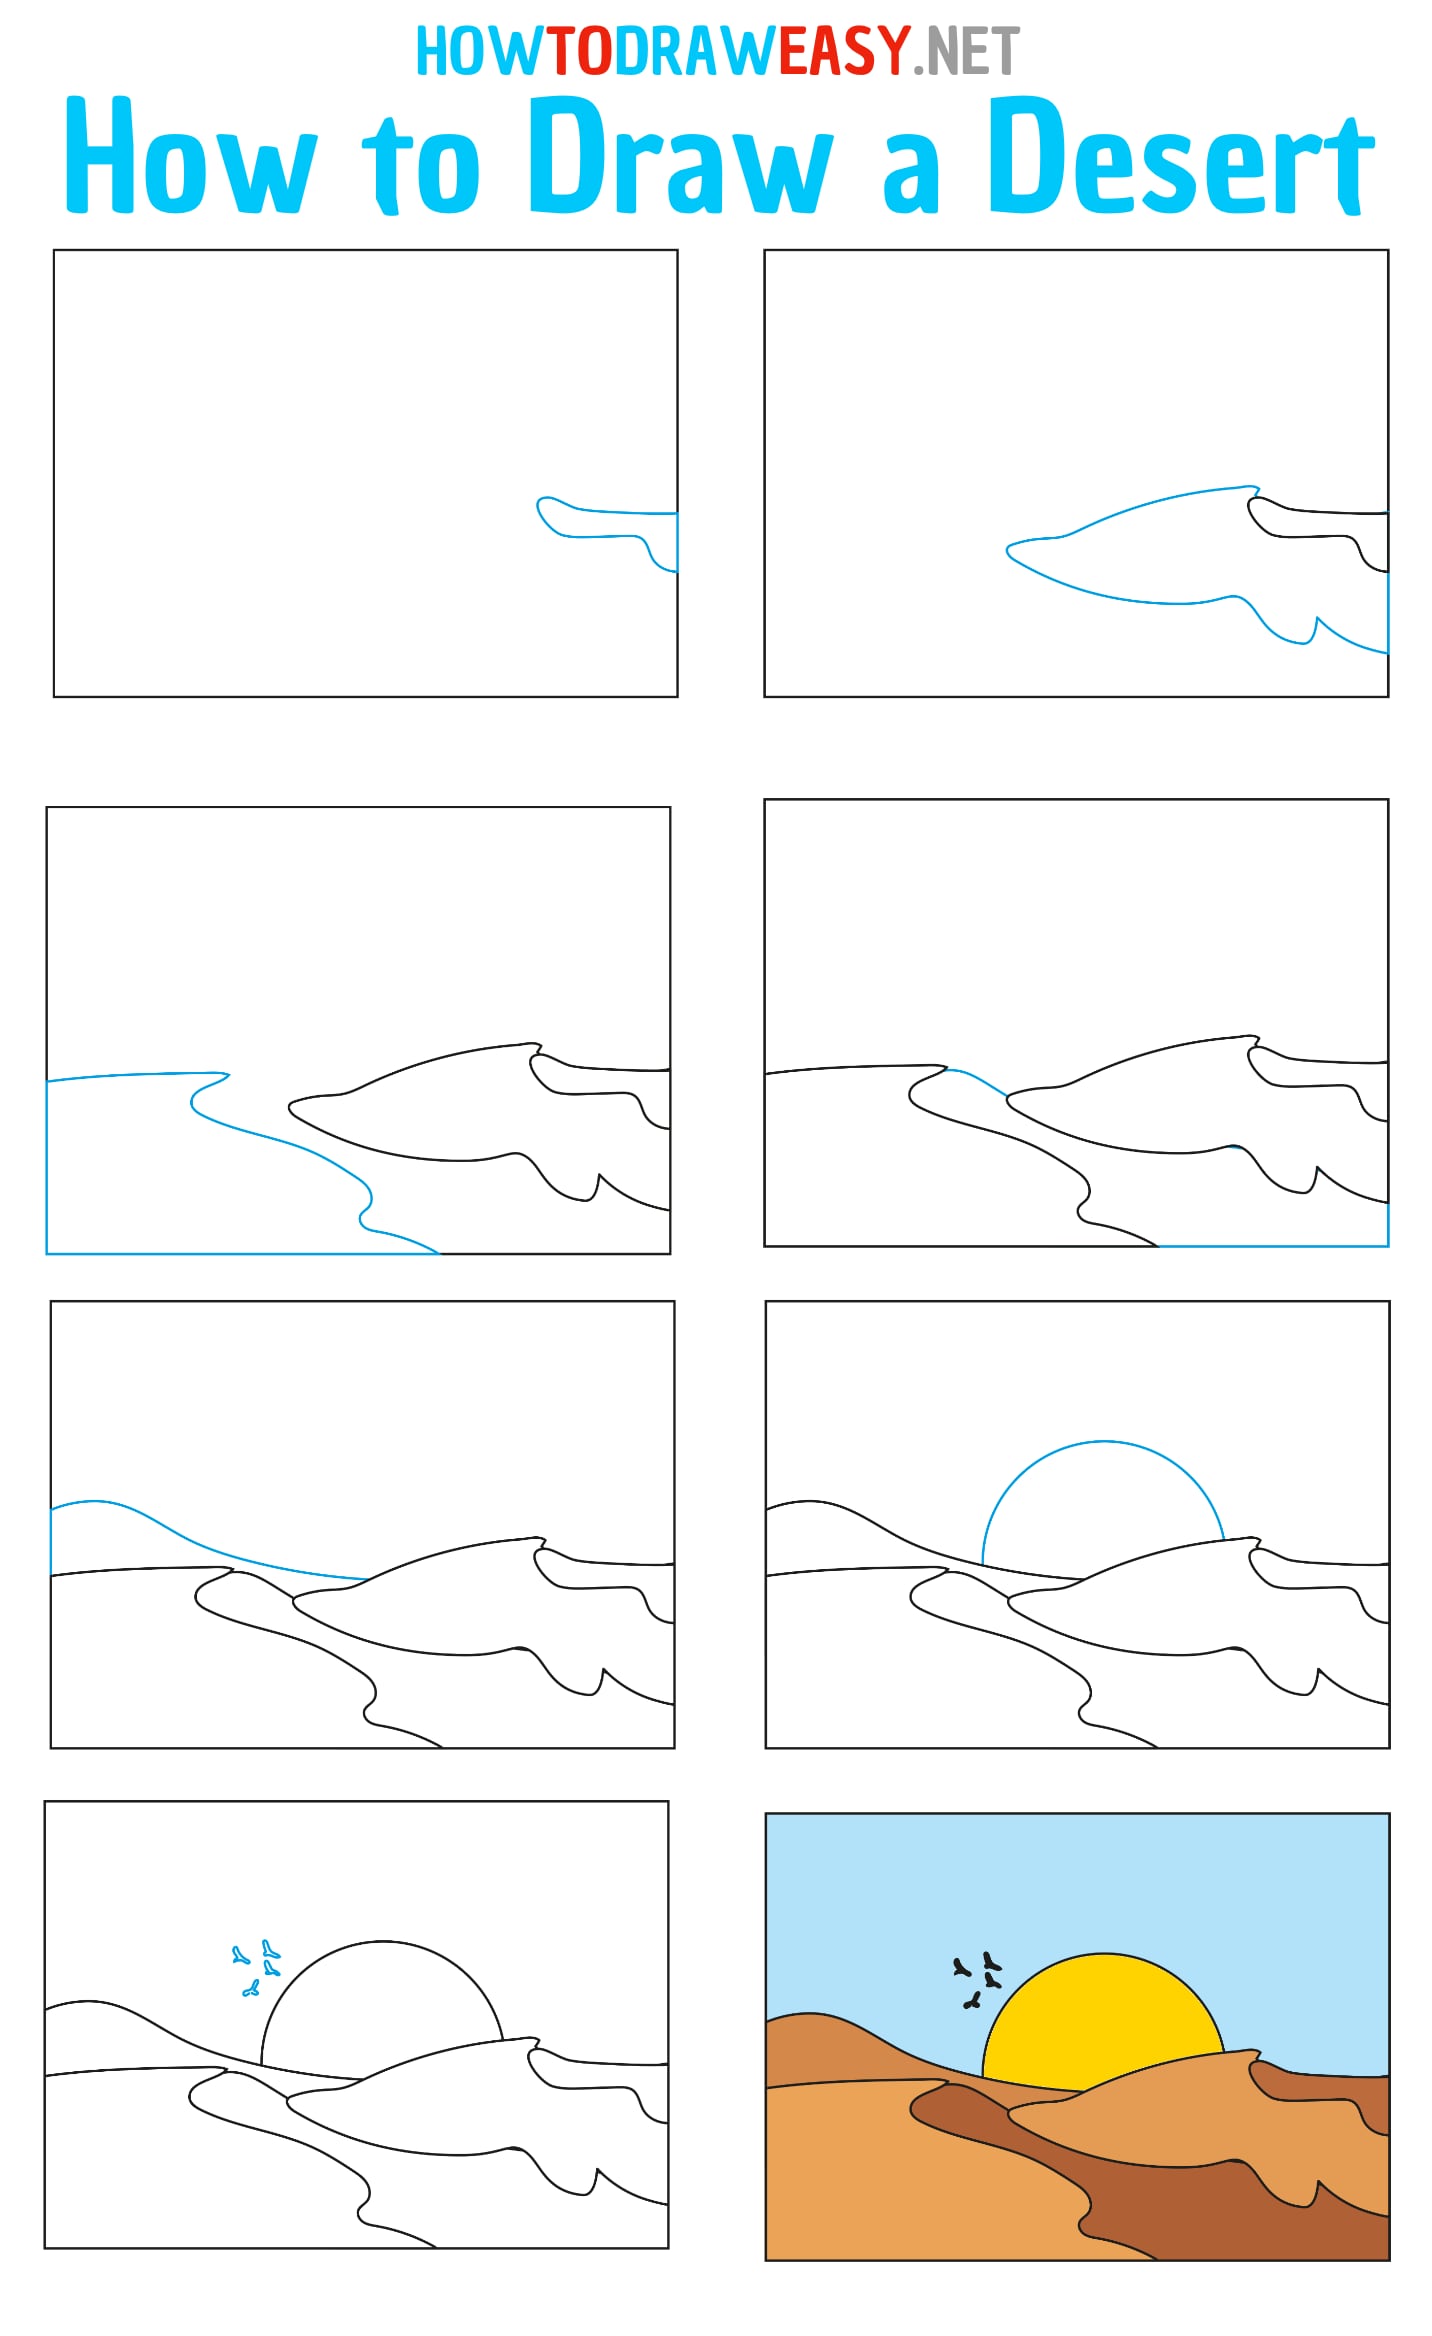 How to Draw a Desert Step by Step